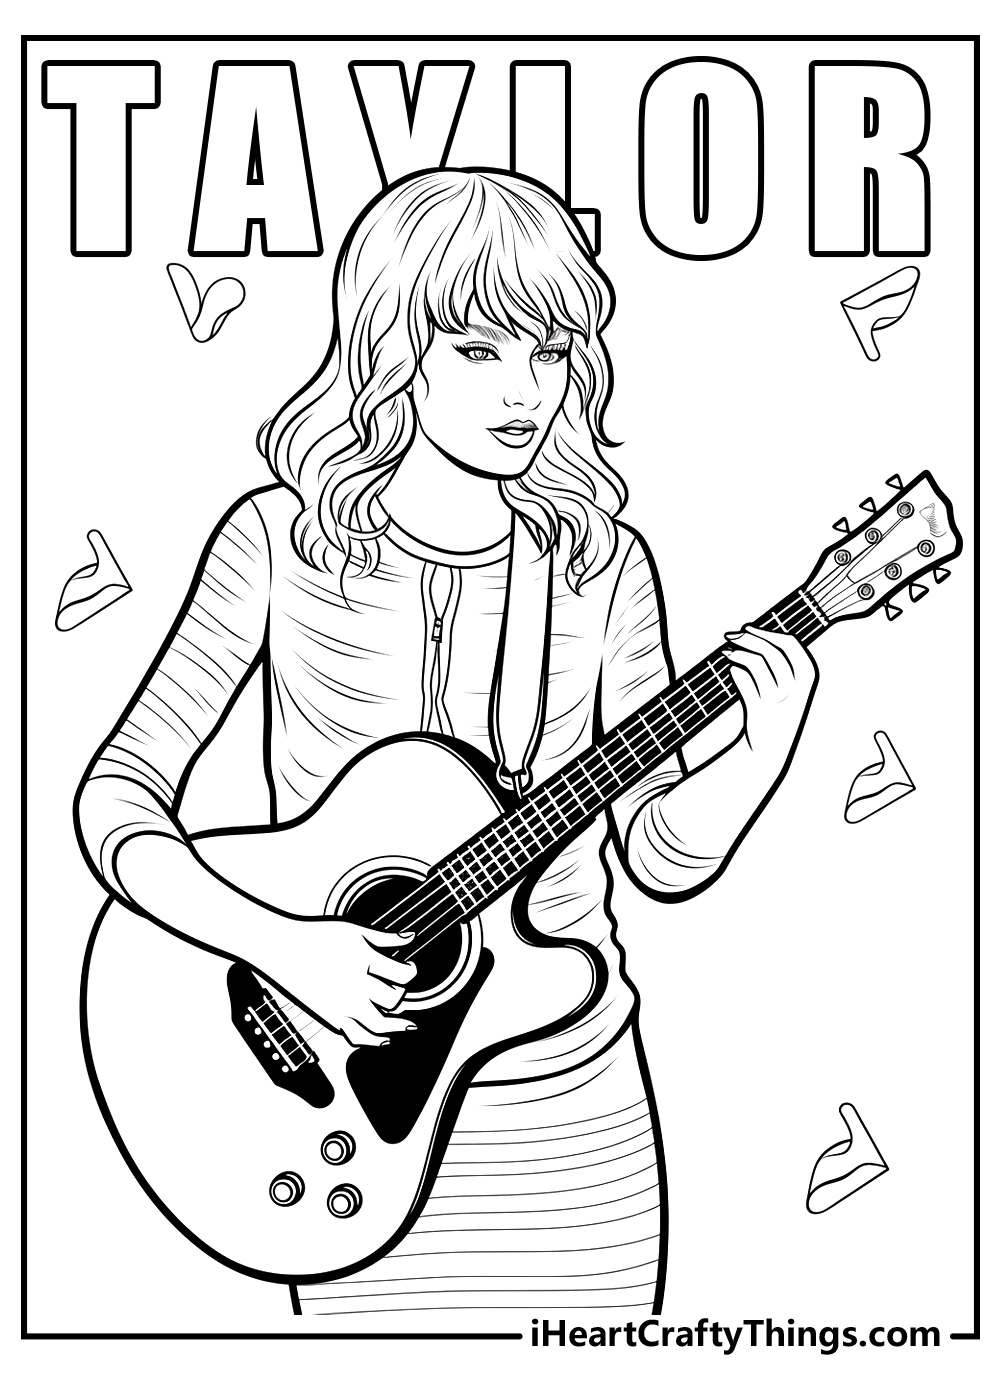 New Taylor Swift Coloring Pages